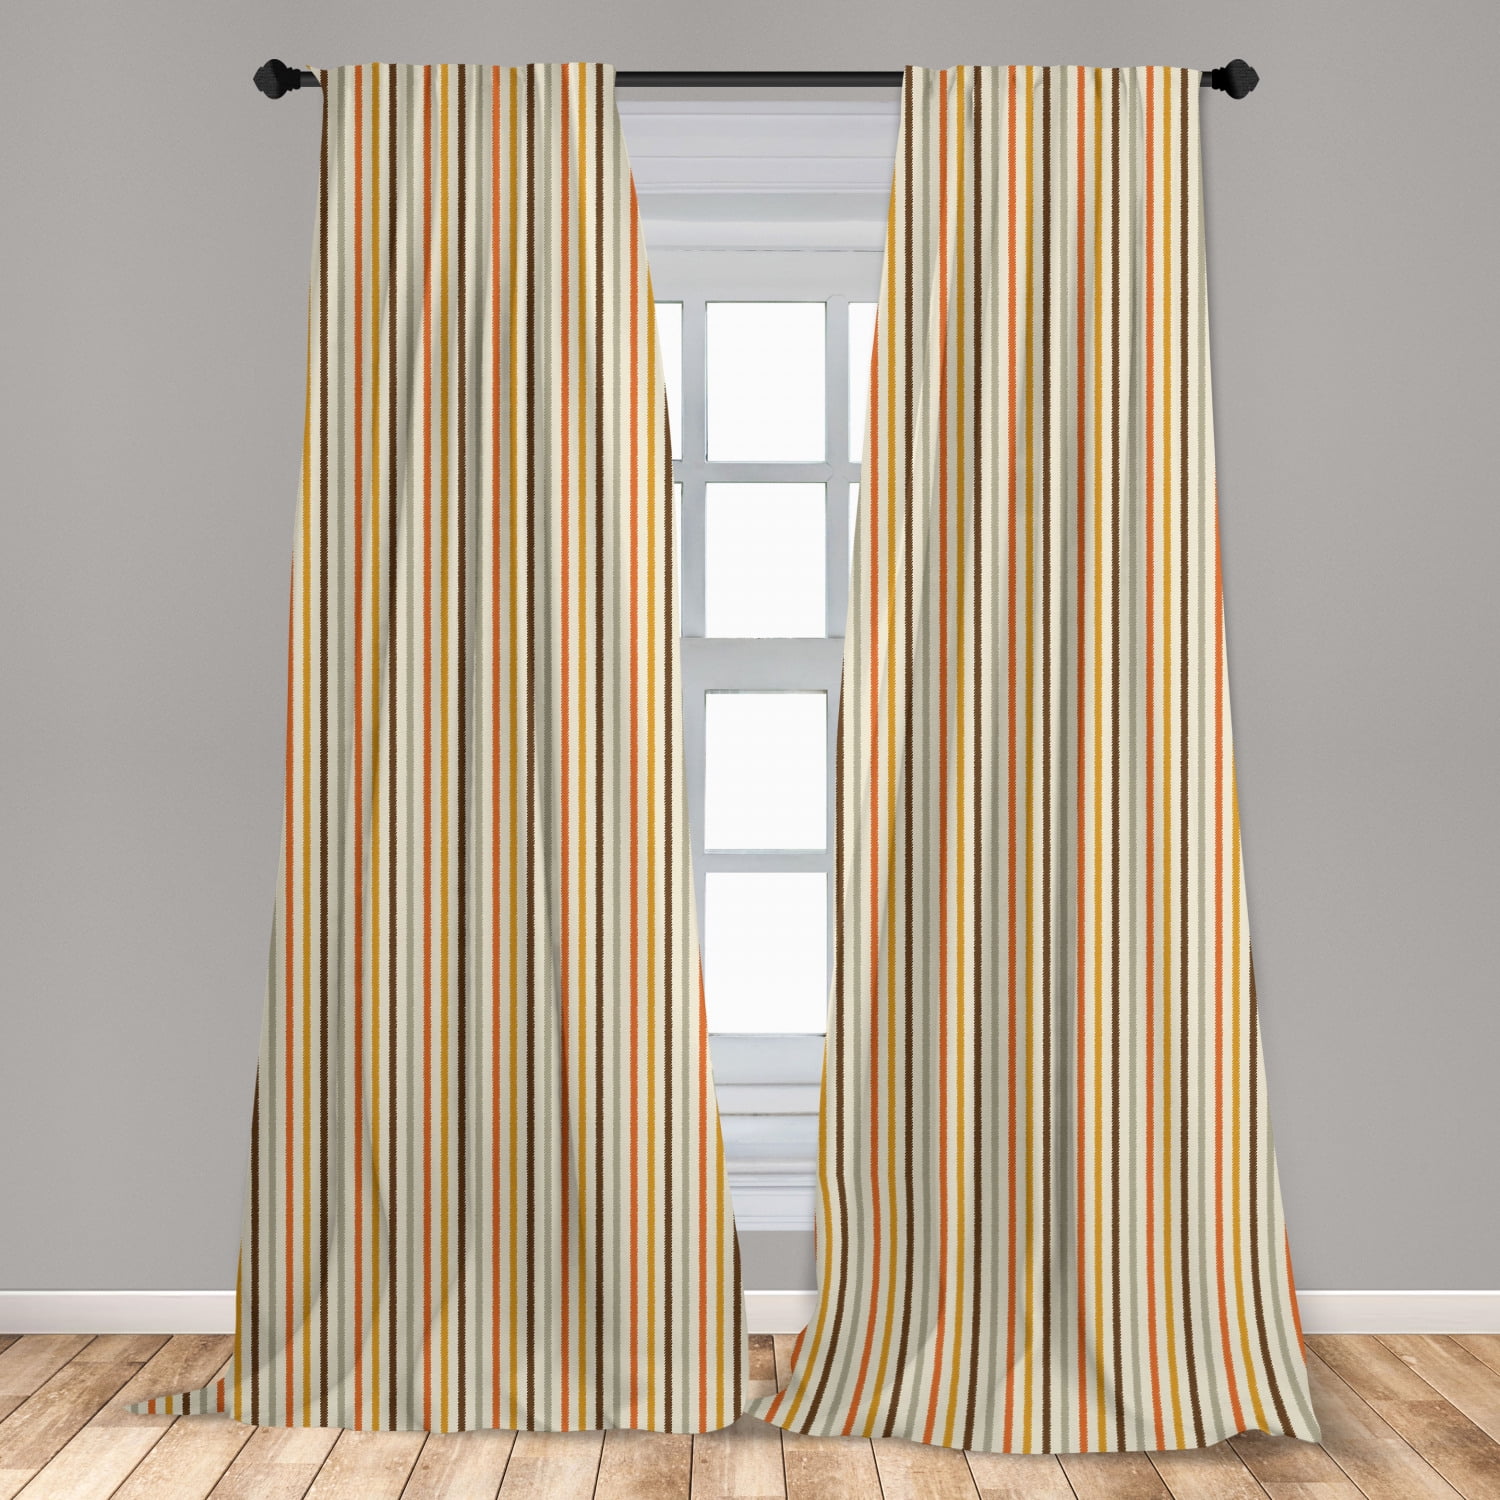 1 Pair Of RAY Chevron Zig Zag Stripe Design Eyelet Ring Top Lined Curtains 